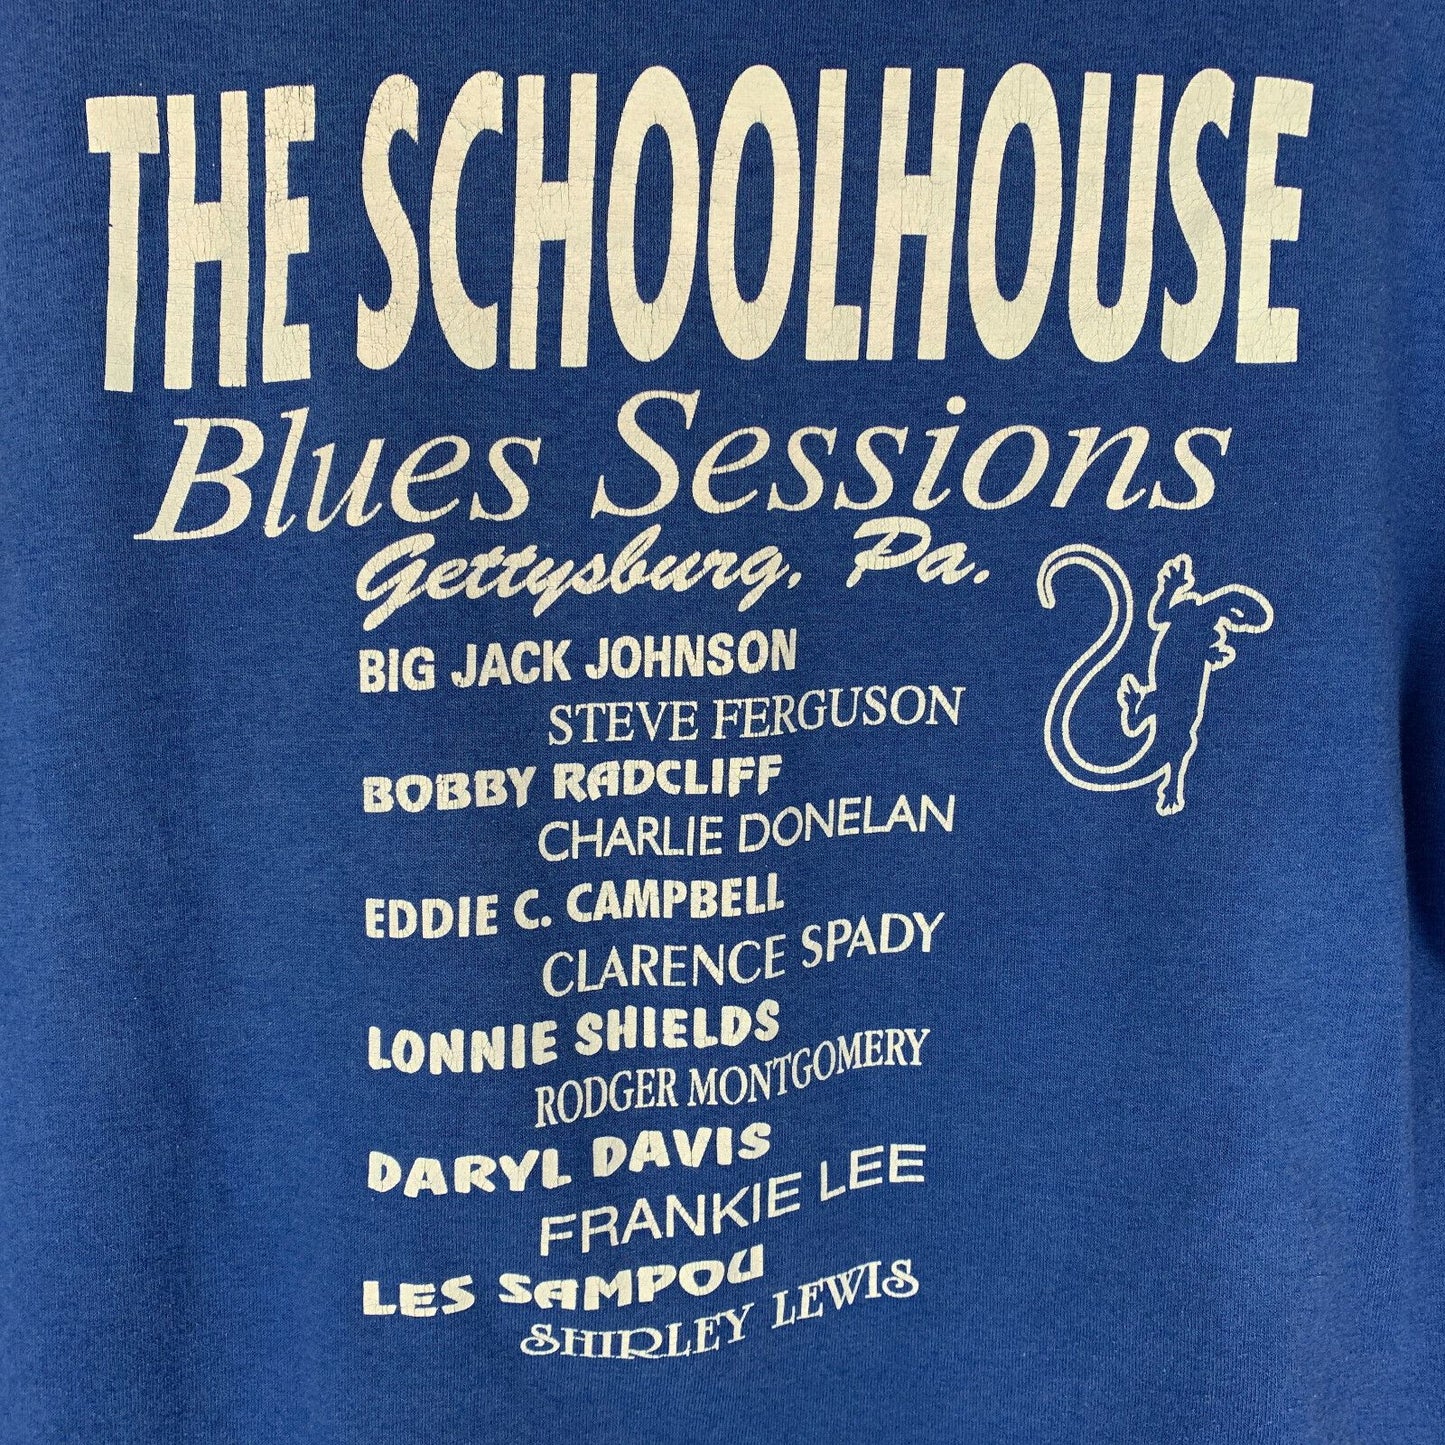 Schoolhouse Blues Sessions Vintage 90s T Shirt Blues Fan Jazz Made In USA Medium